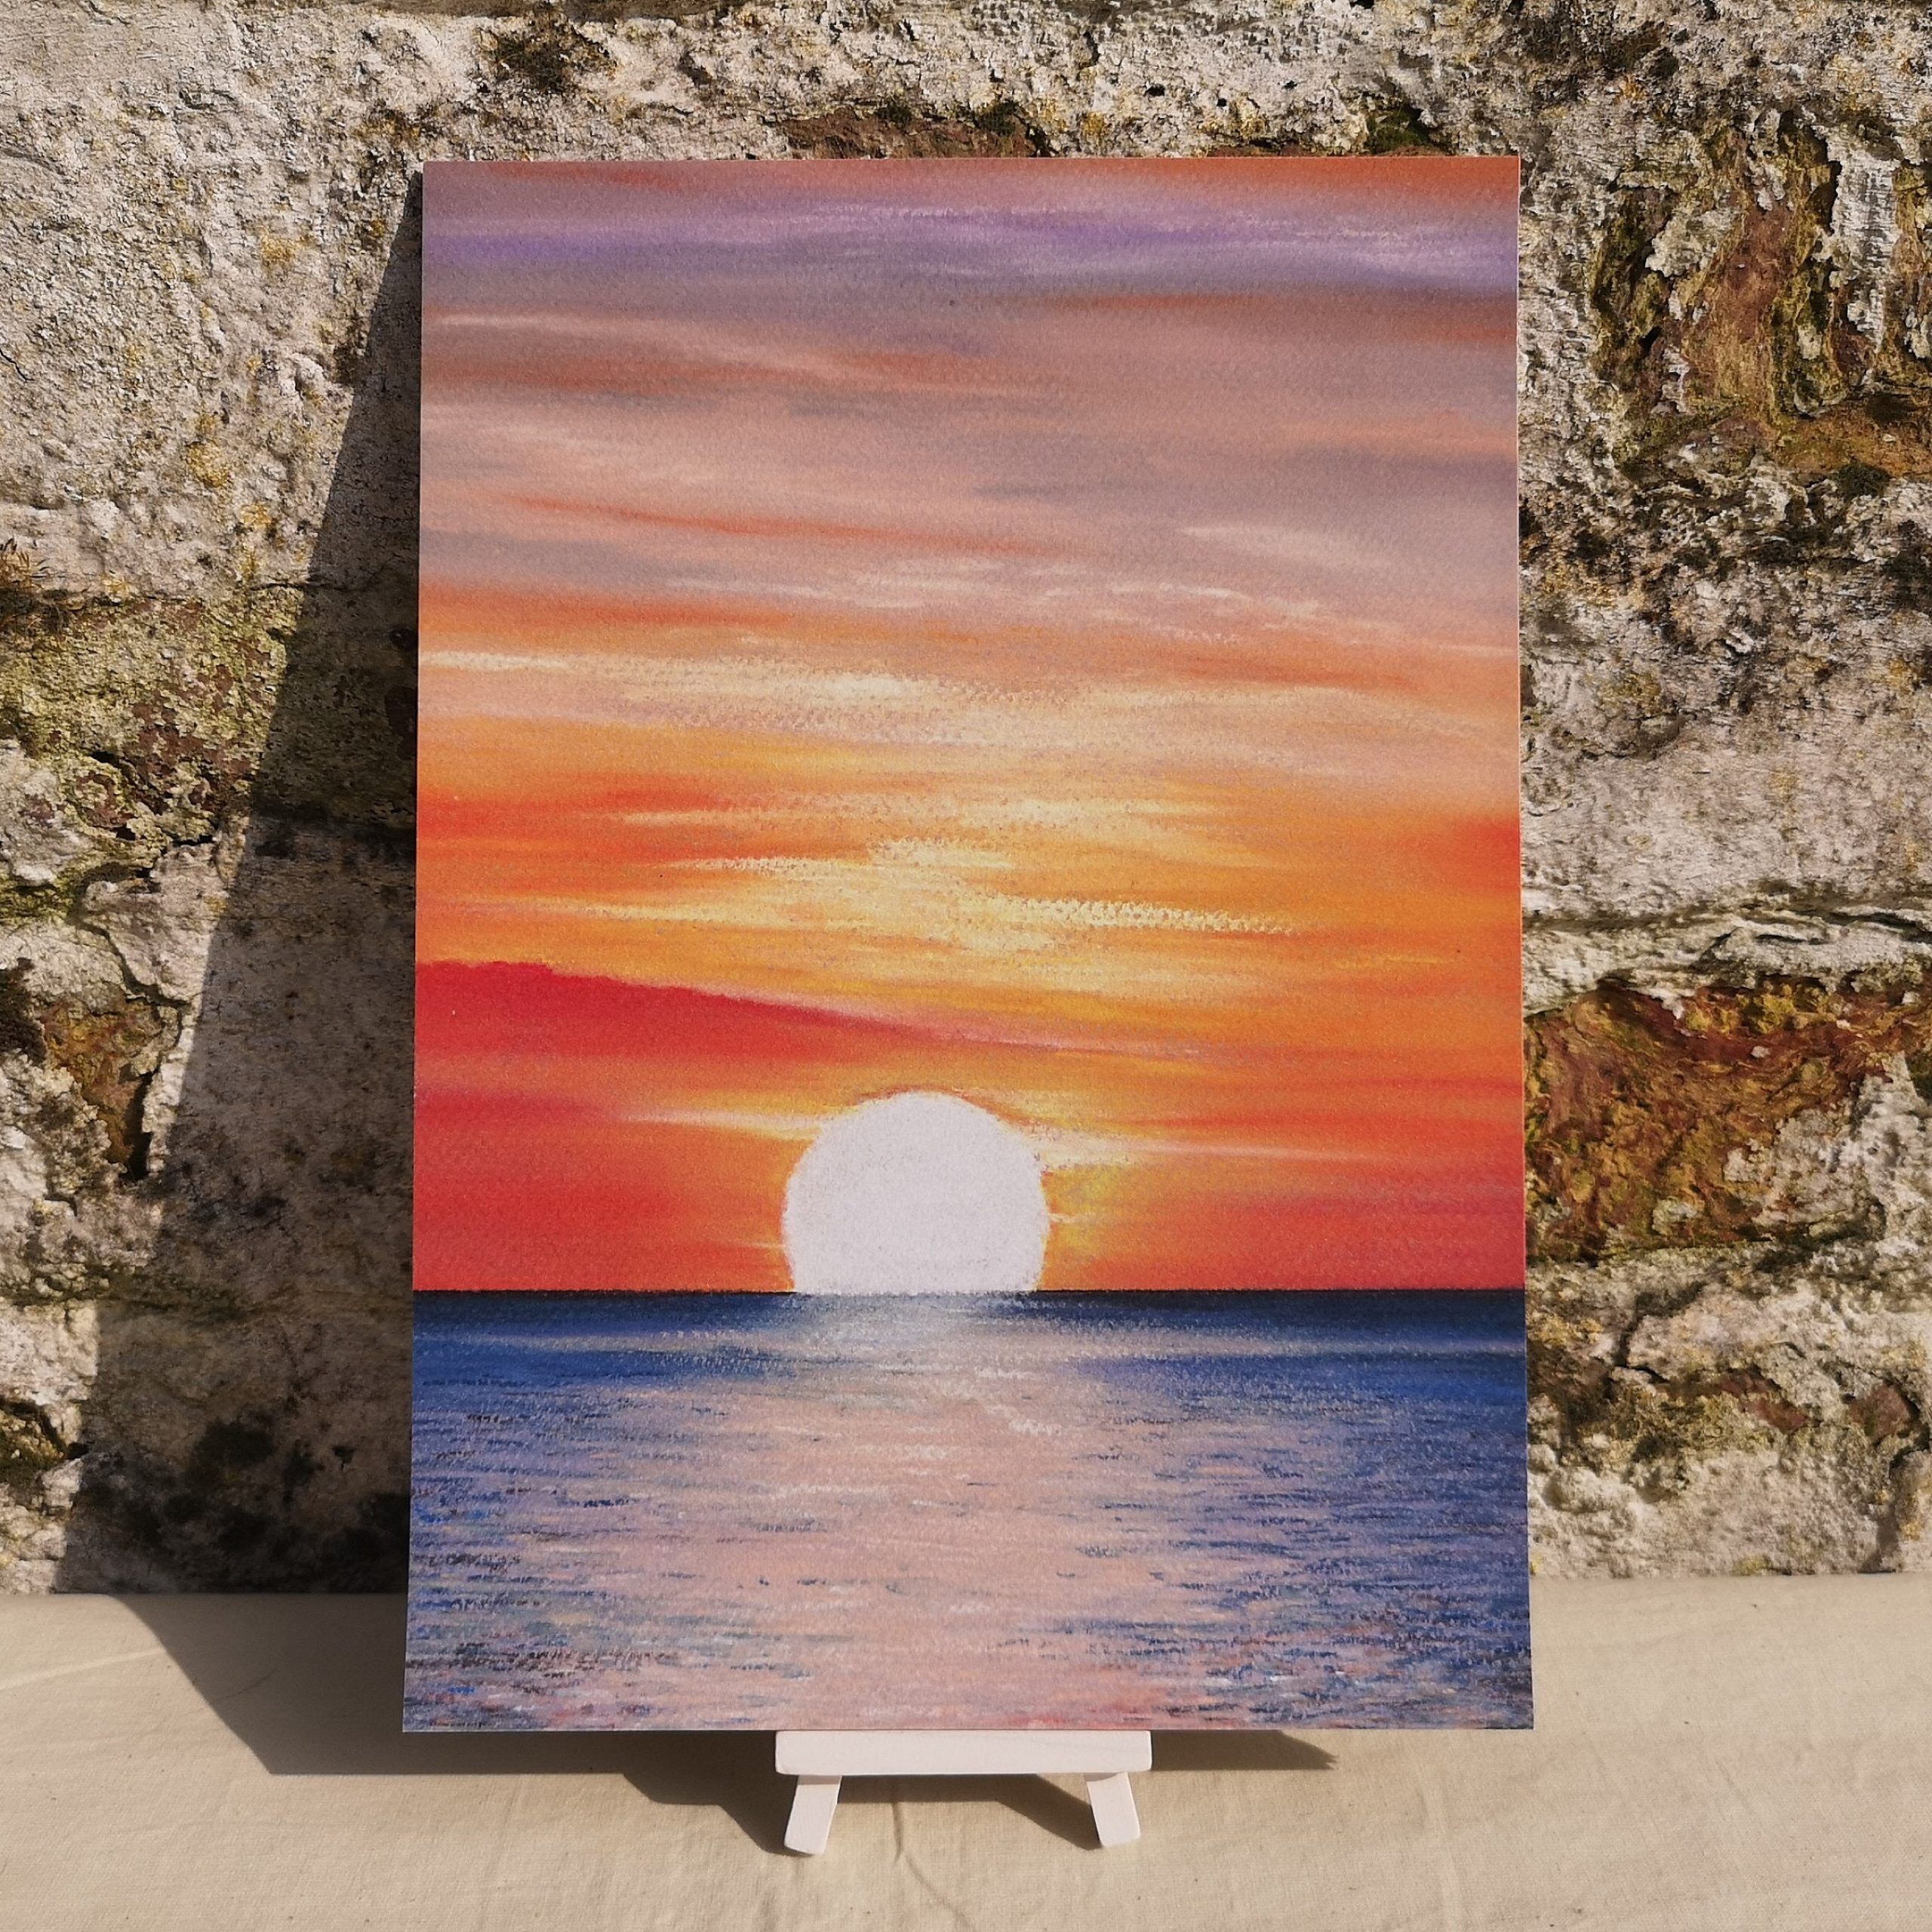 Pastel Sunset Art – Etsy With Regard To Pastel Sunset Wall Art (View 14 of 15)